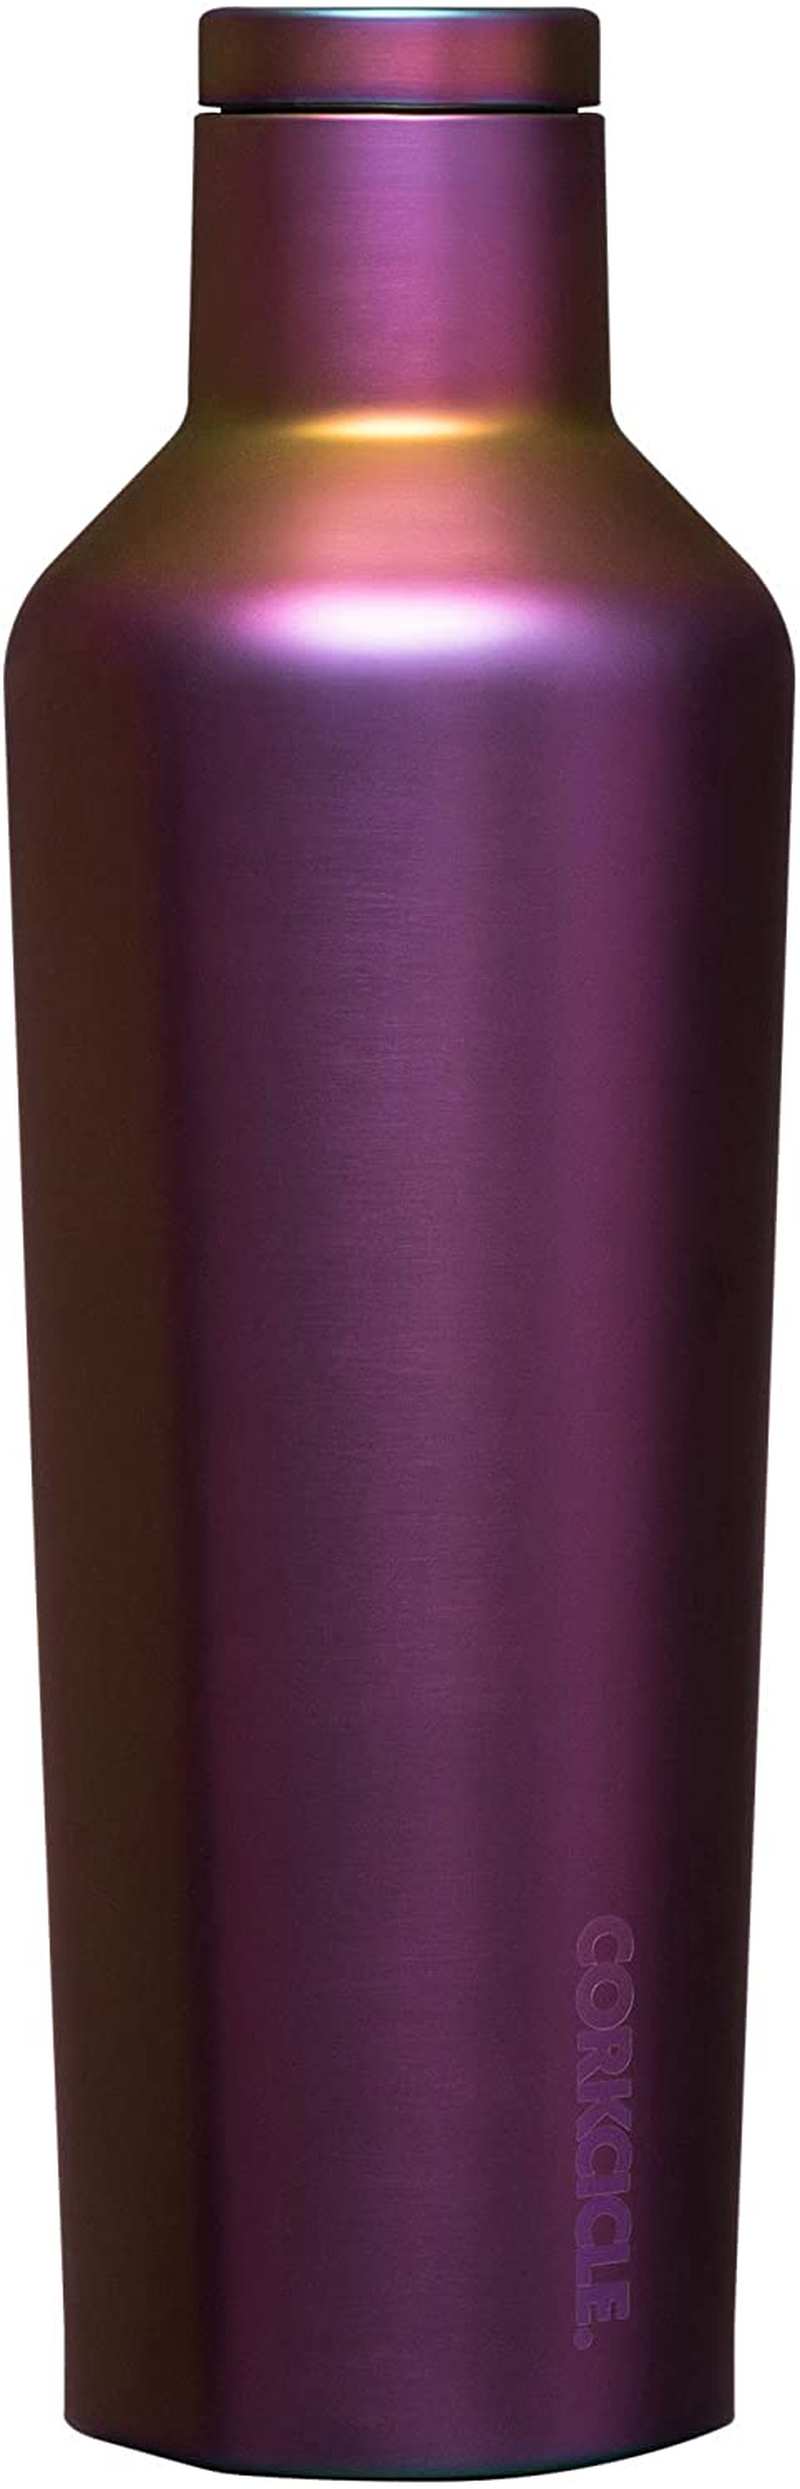 Corkcicle Canteen - Water Bottle & Thermos - Triple Insulated Stainless Steel, 16 oz, Matte Black